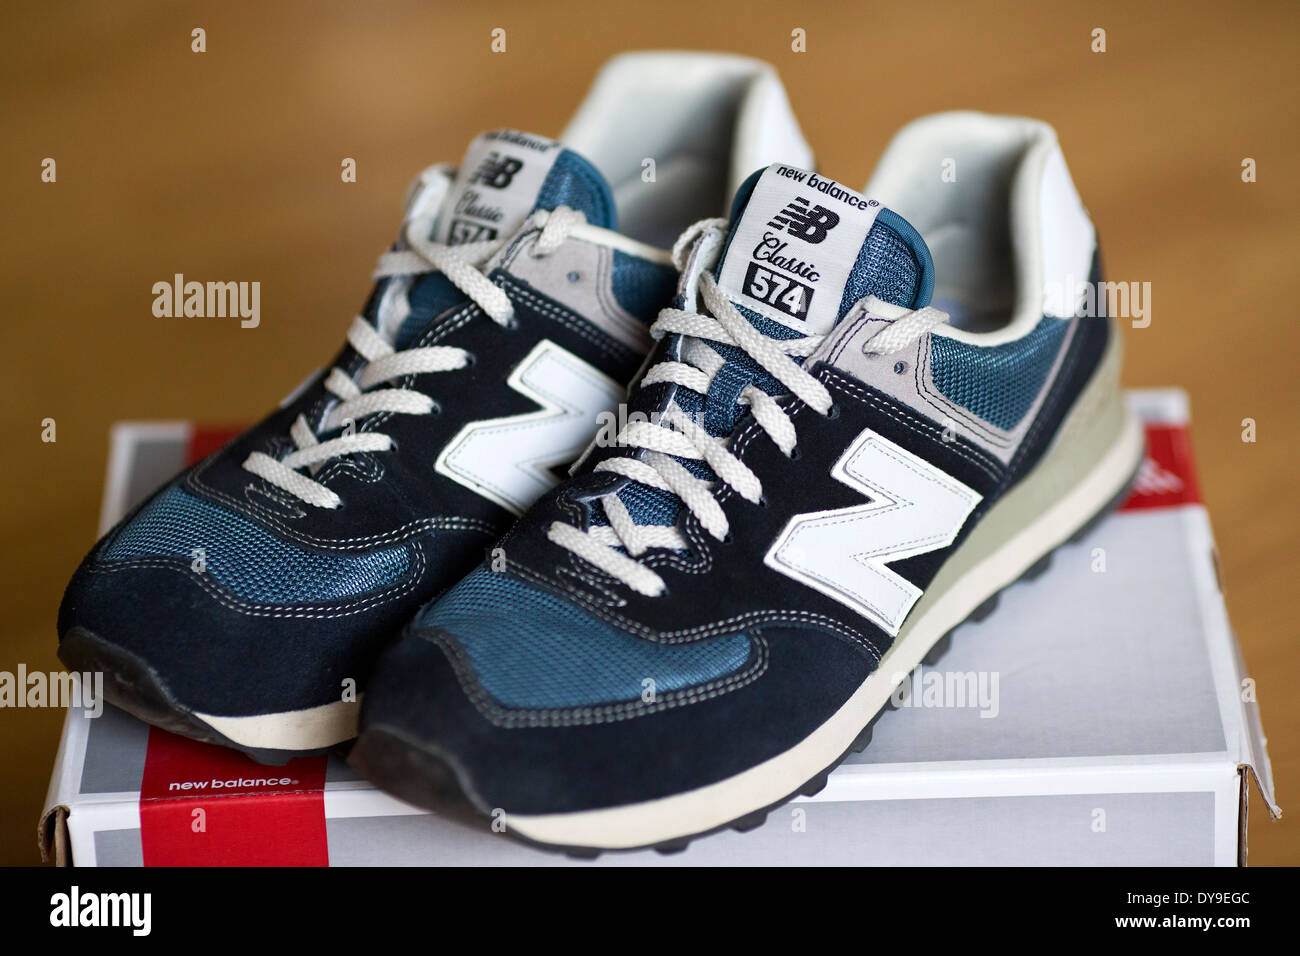 UK, London : A picture shows a pair of New Balance shoes on a shoe box  Stock Photo - Alamy